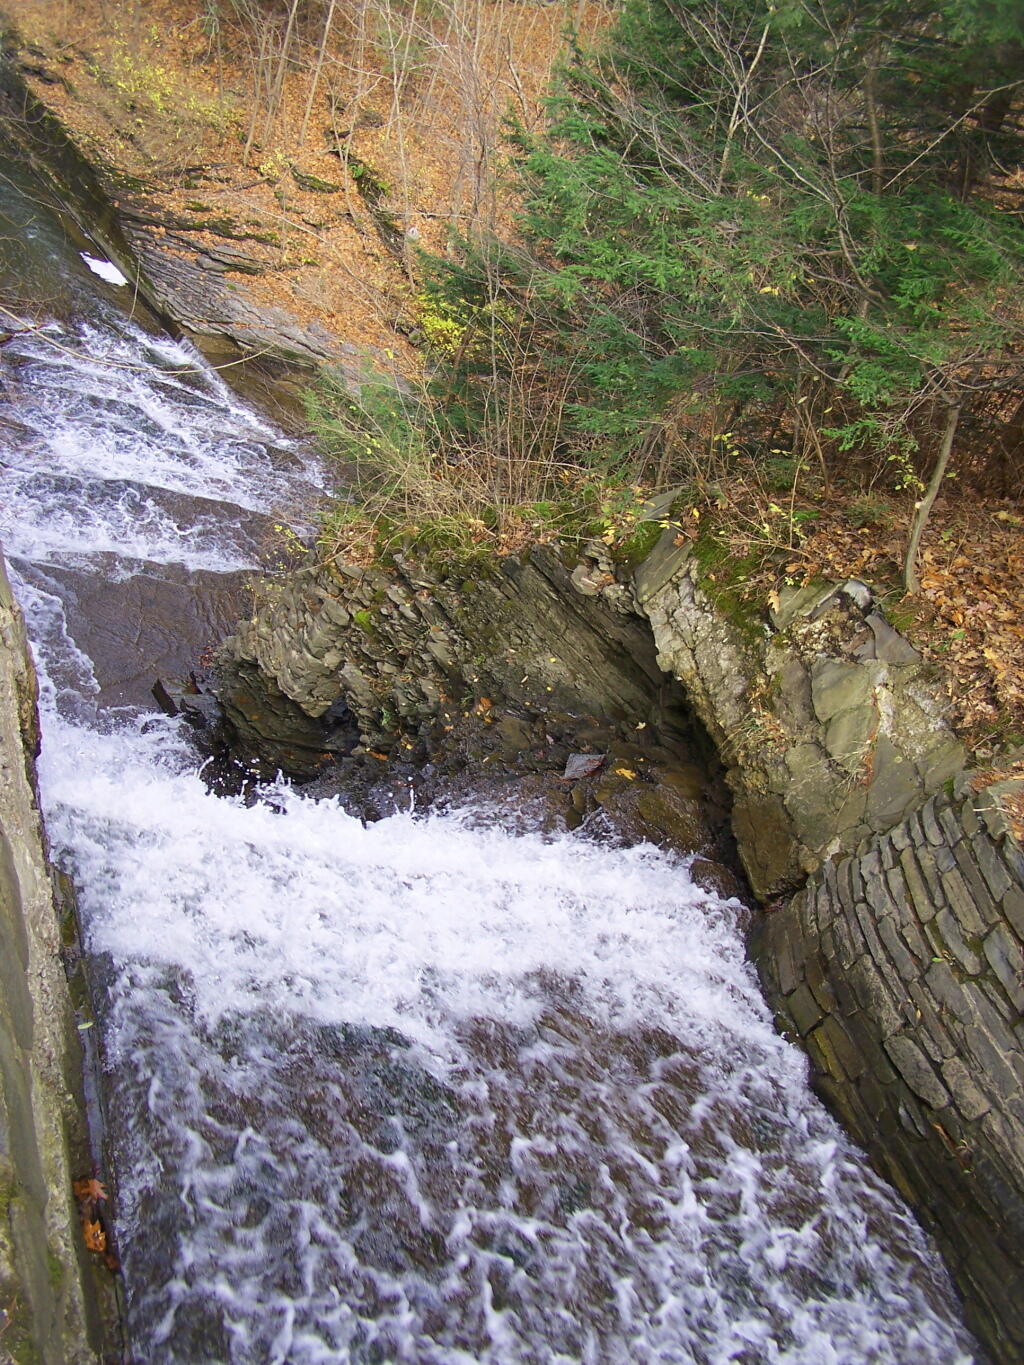 Looking Down the Falls